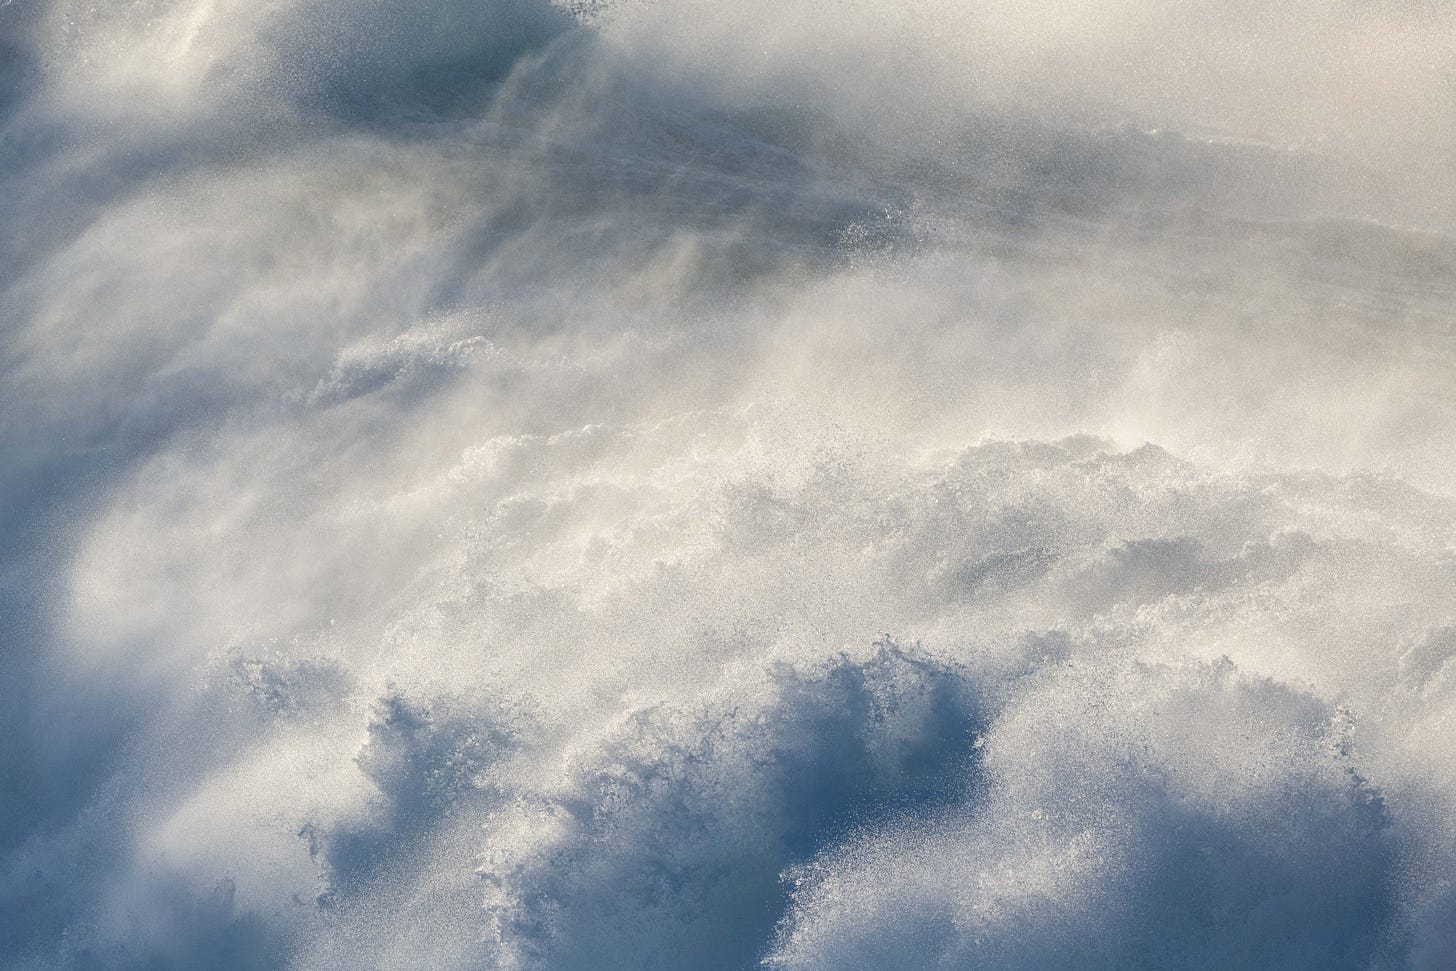 Clouds of sae spray over breaking waves